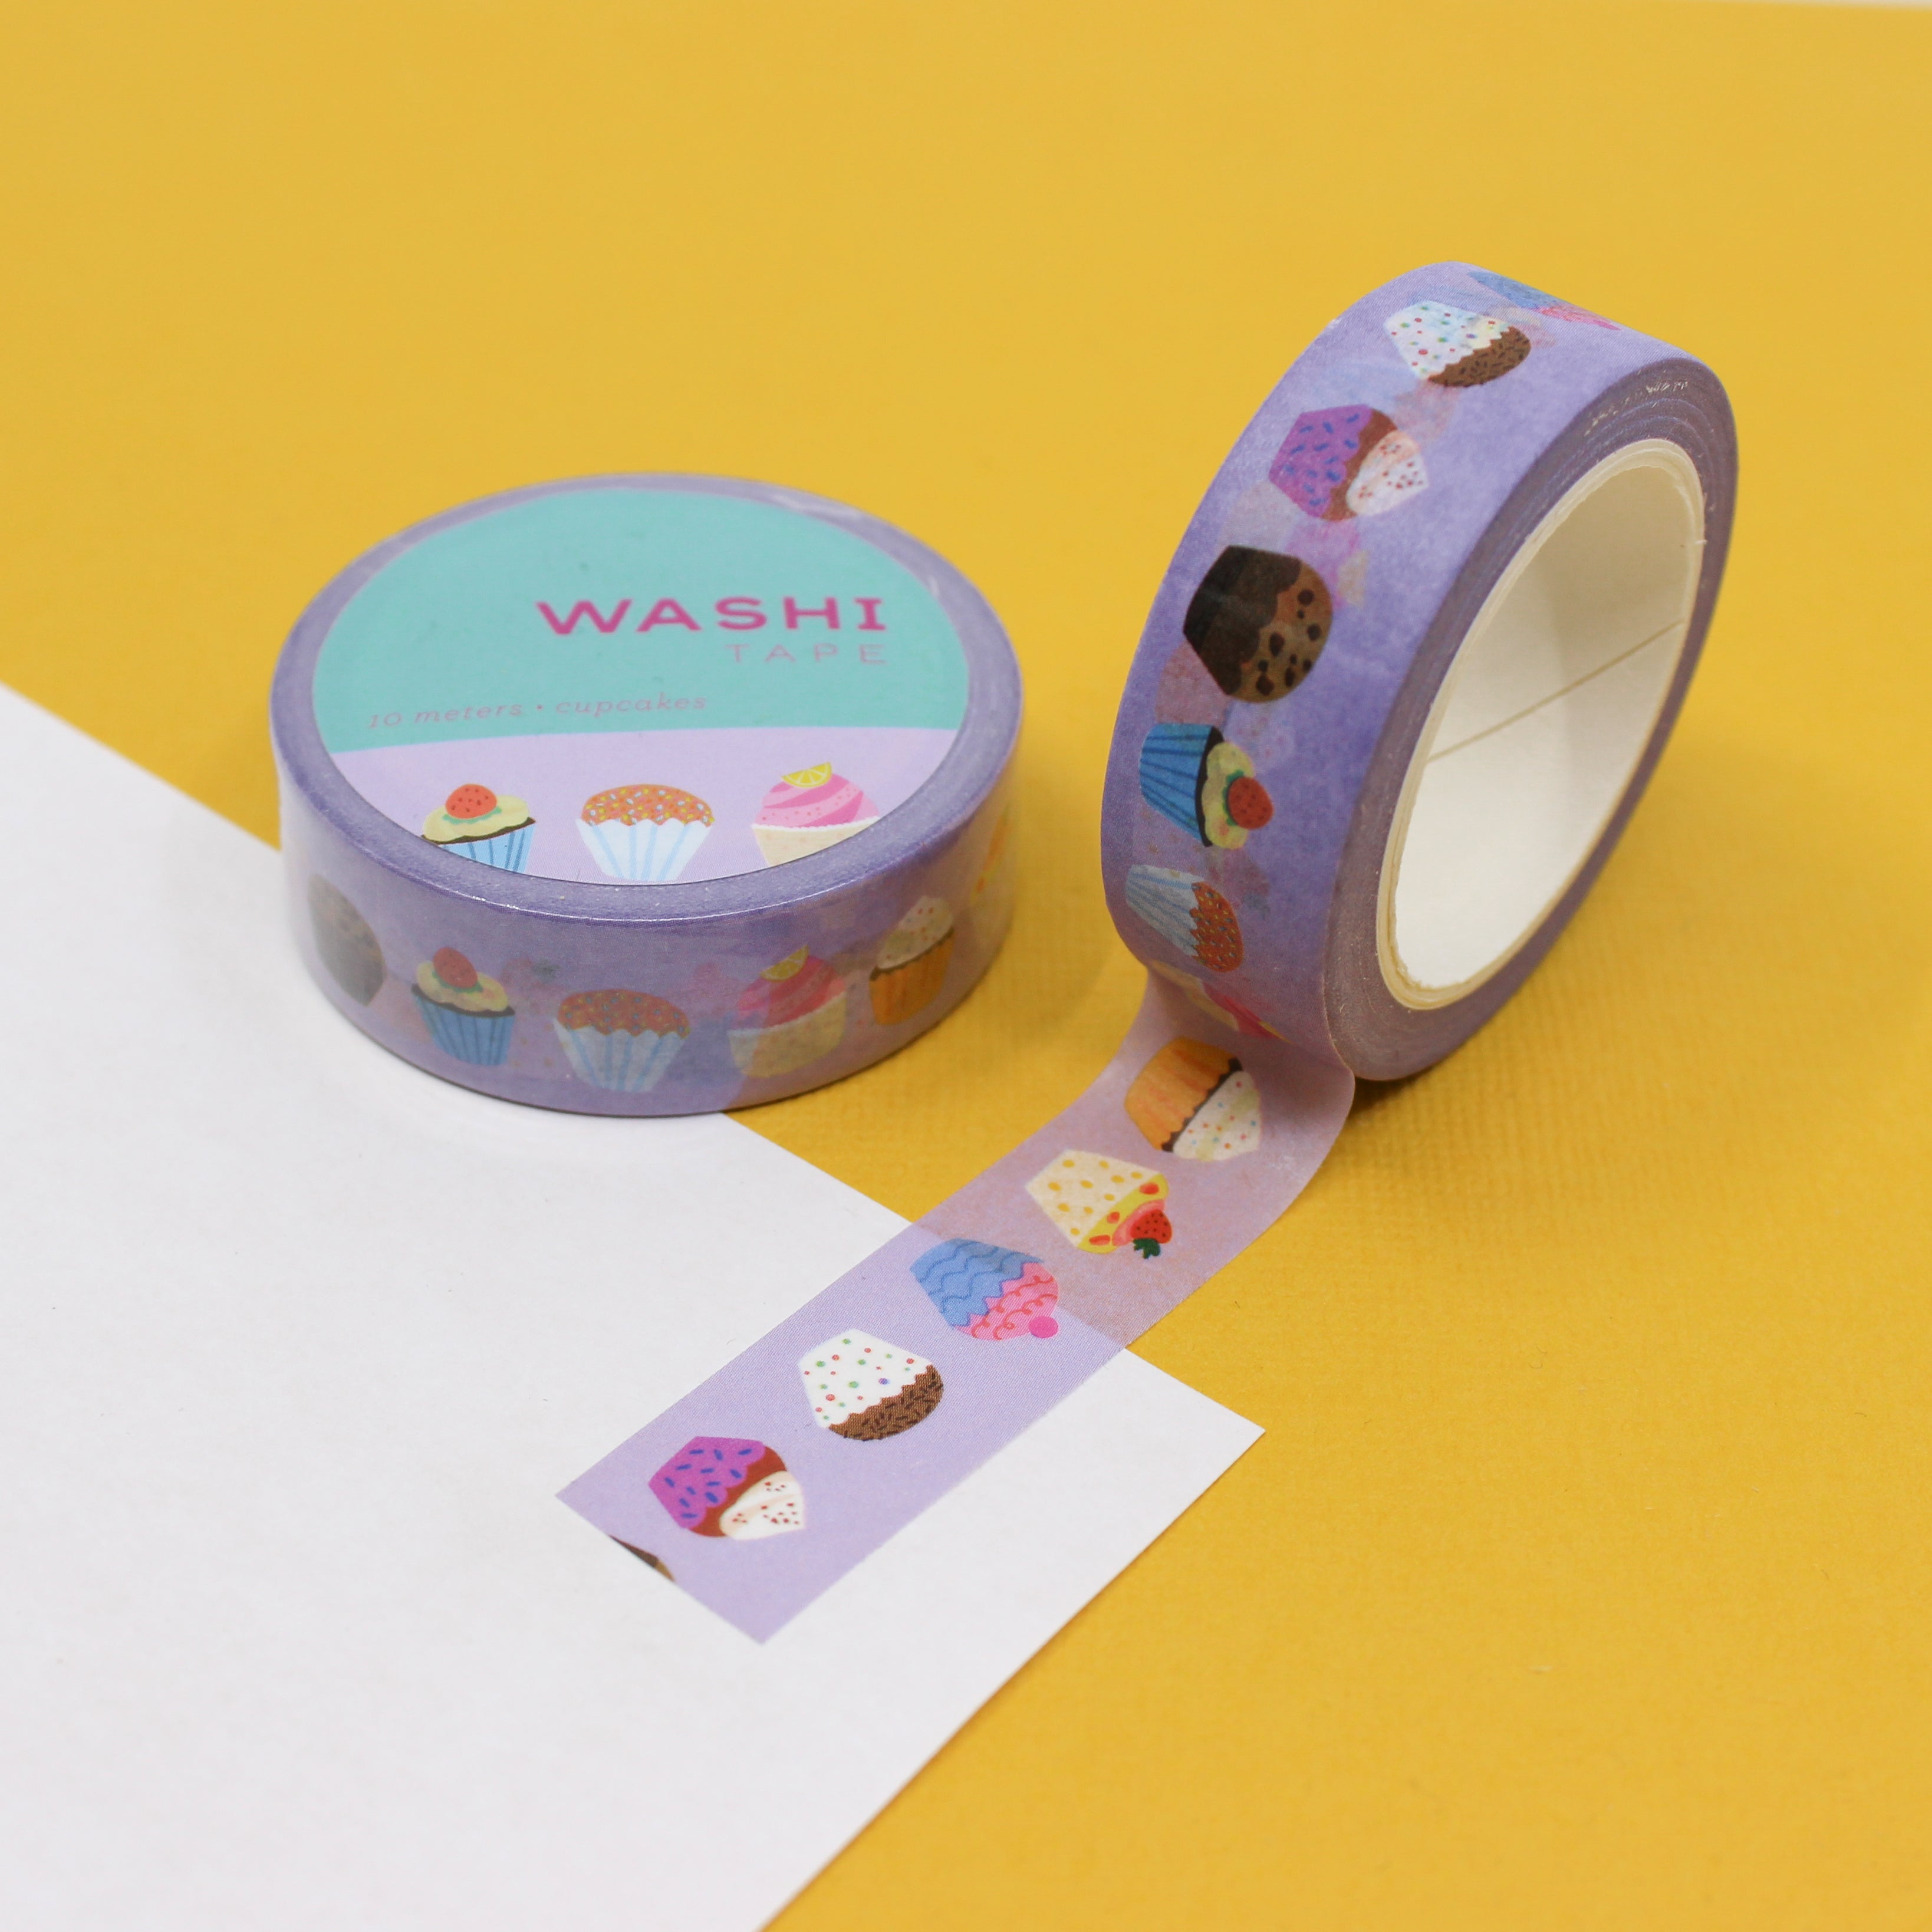 This is a purple foil sweet cupcakes pattern washi tape from BBB Supplies Craft Shop